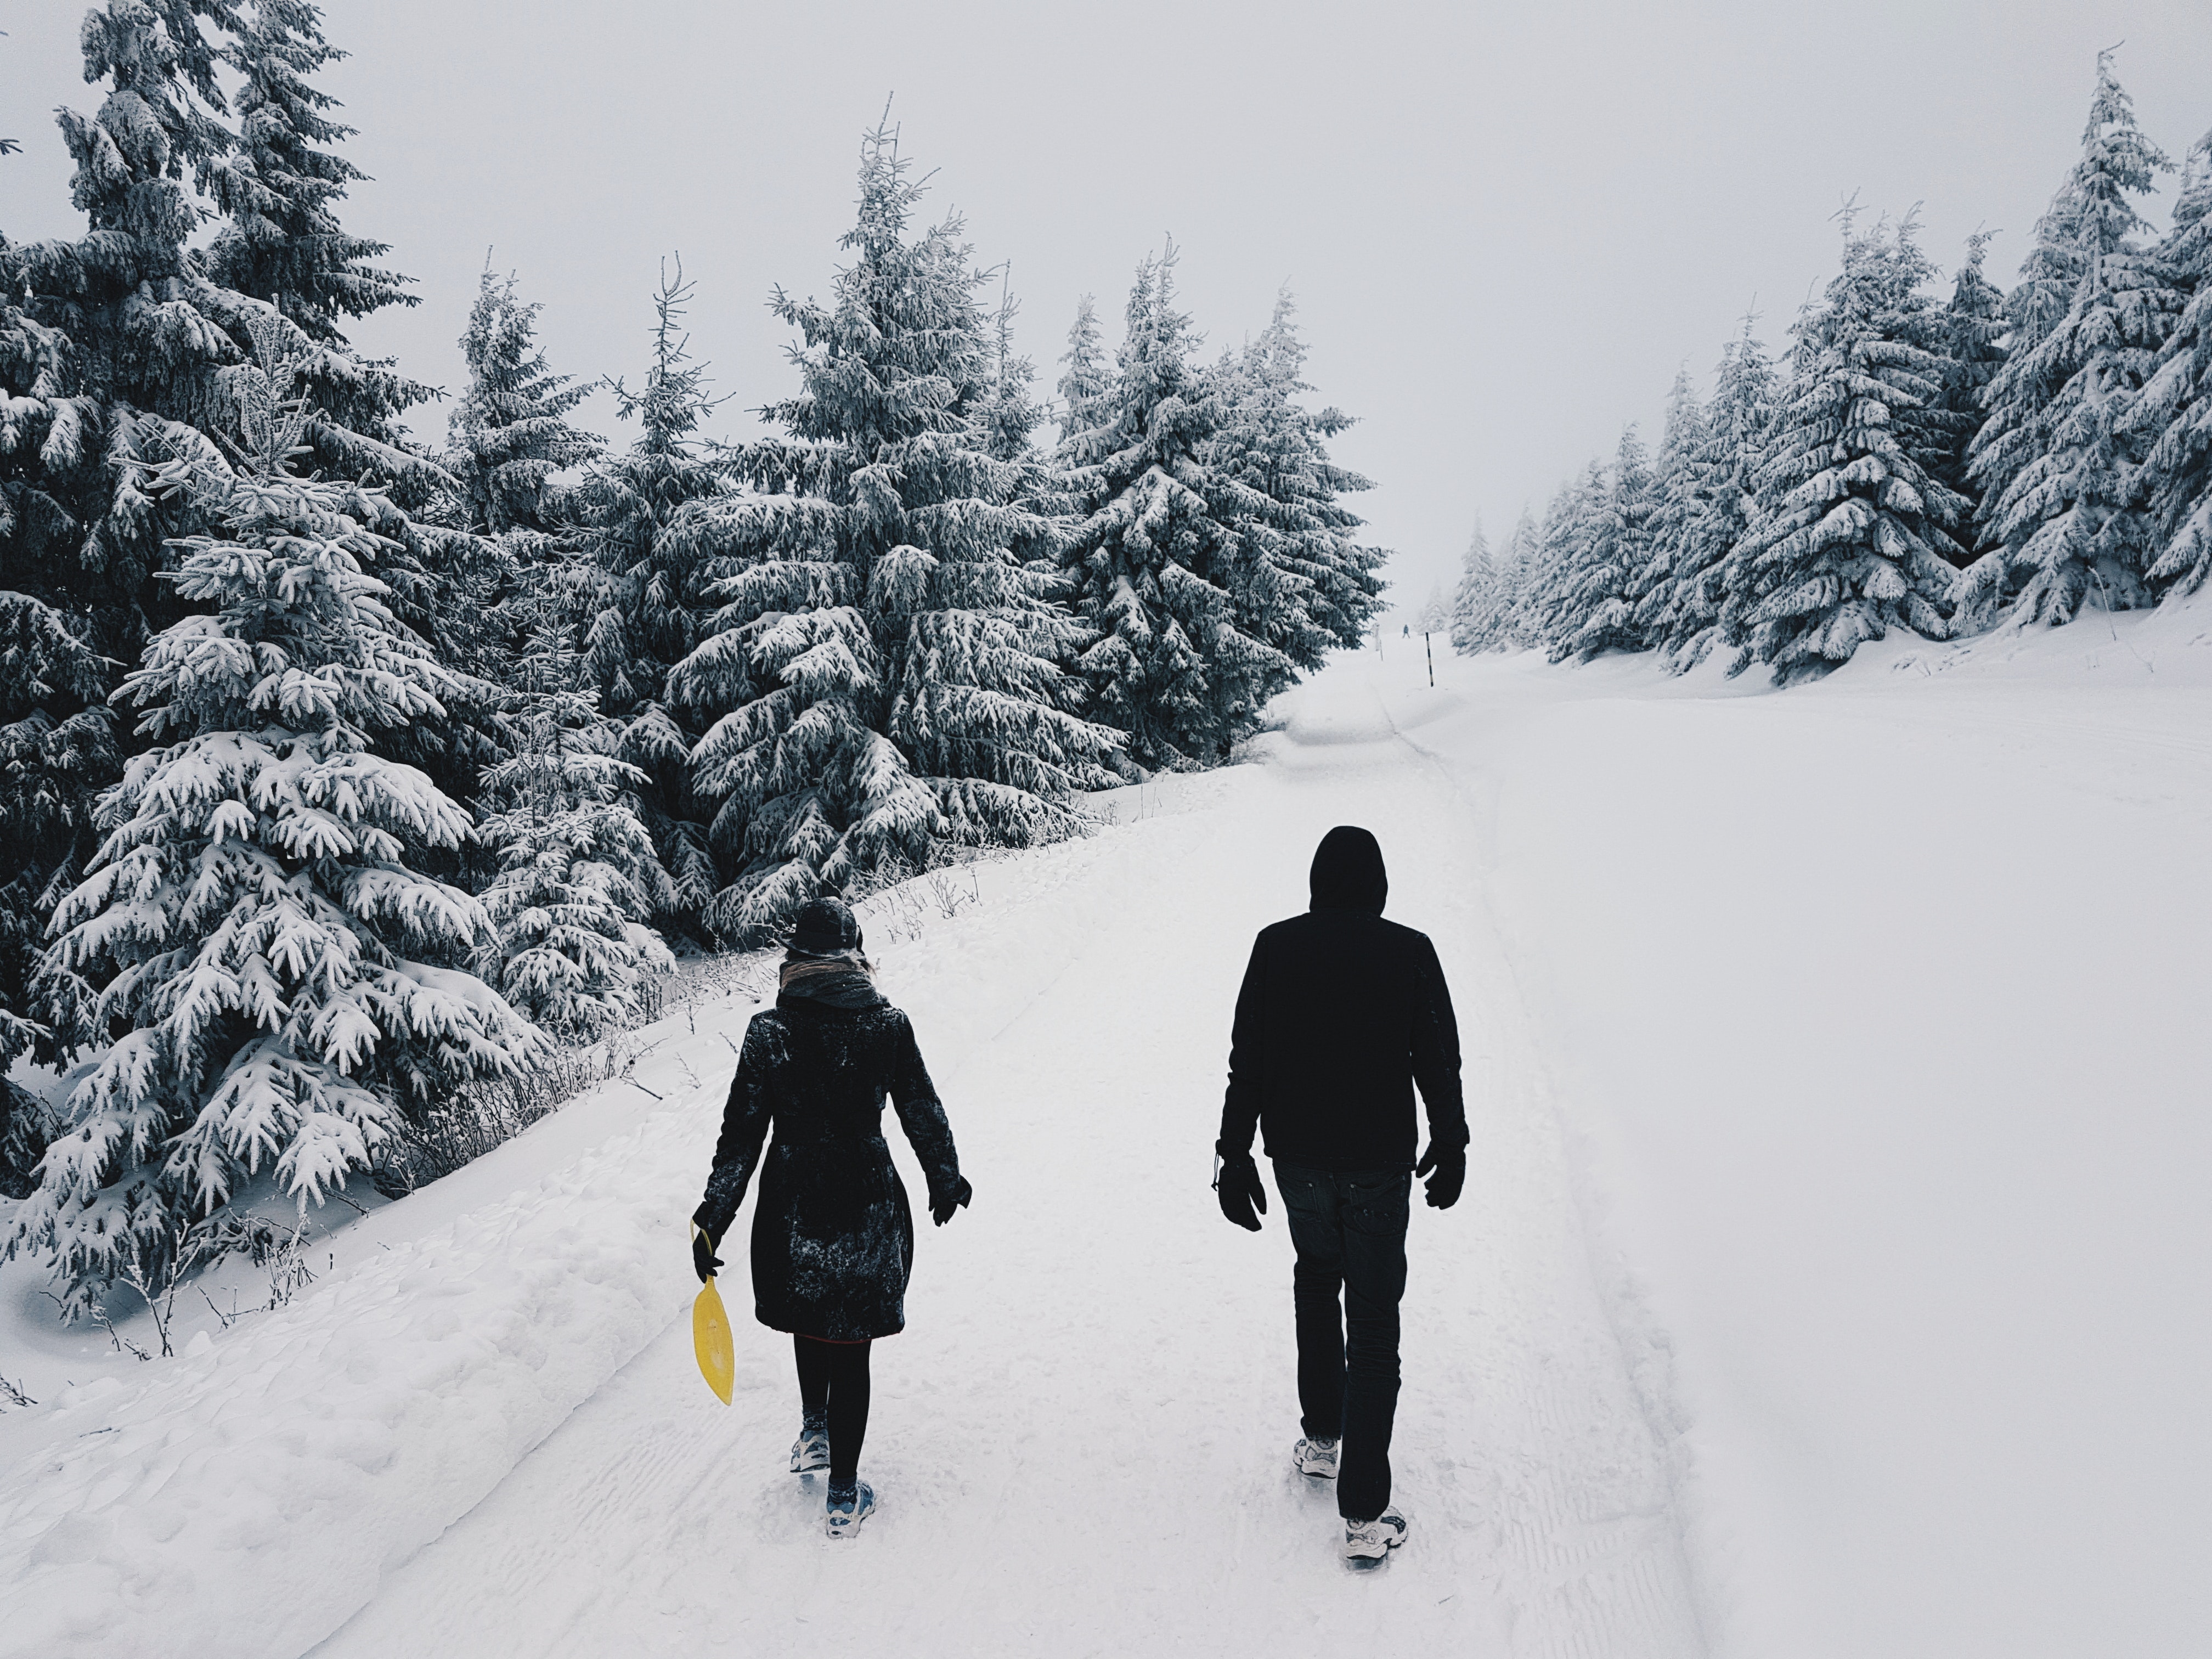 Photograph of Two Persons in the Middle of the Road on a Snowy Setting, Road, Wood, Winter wonderland, Winter clothing, HQ Photo